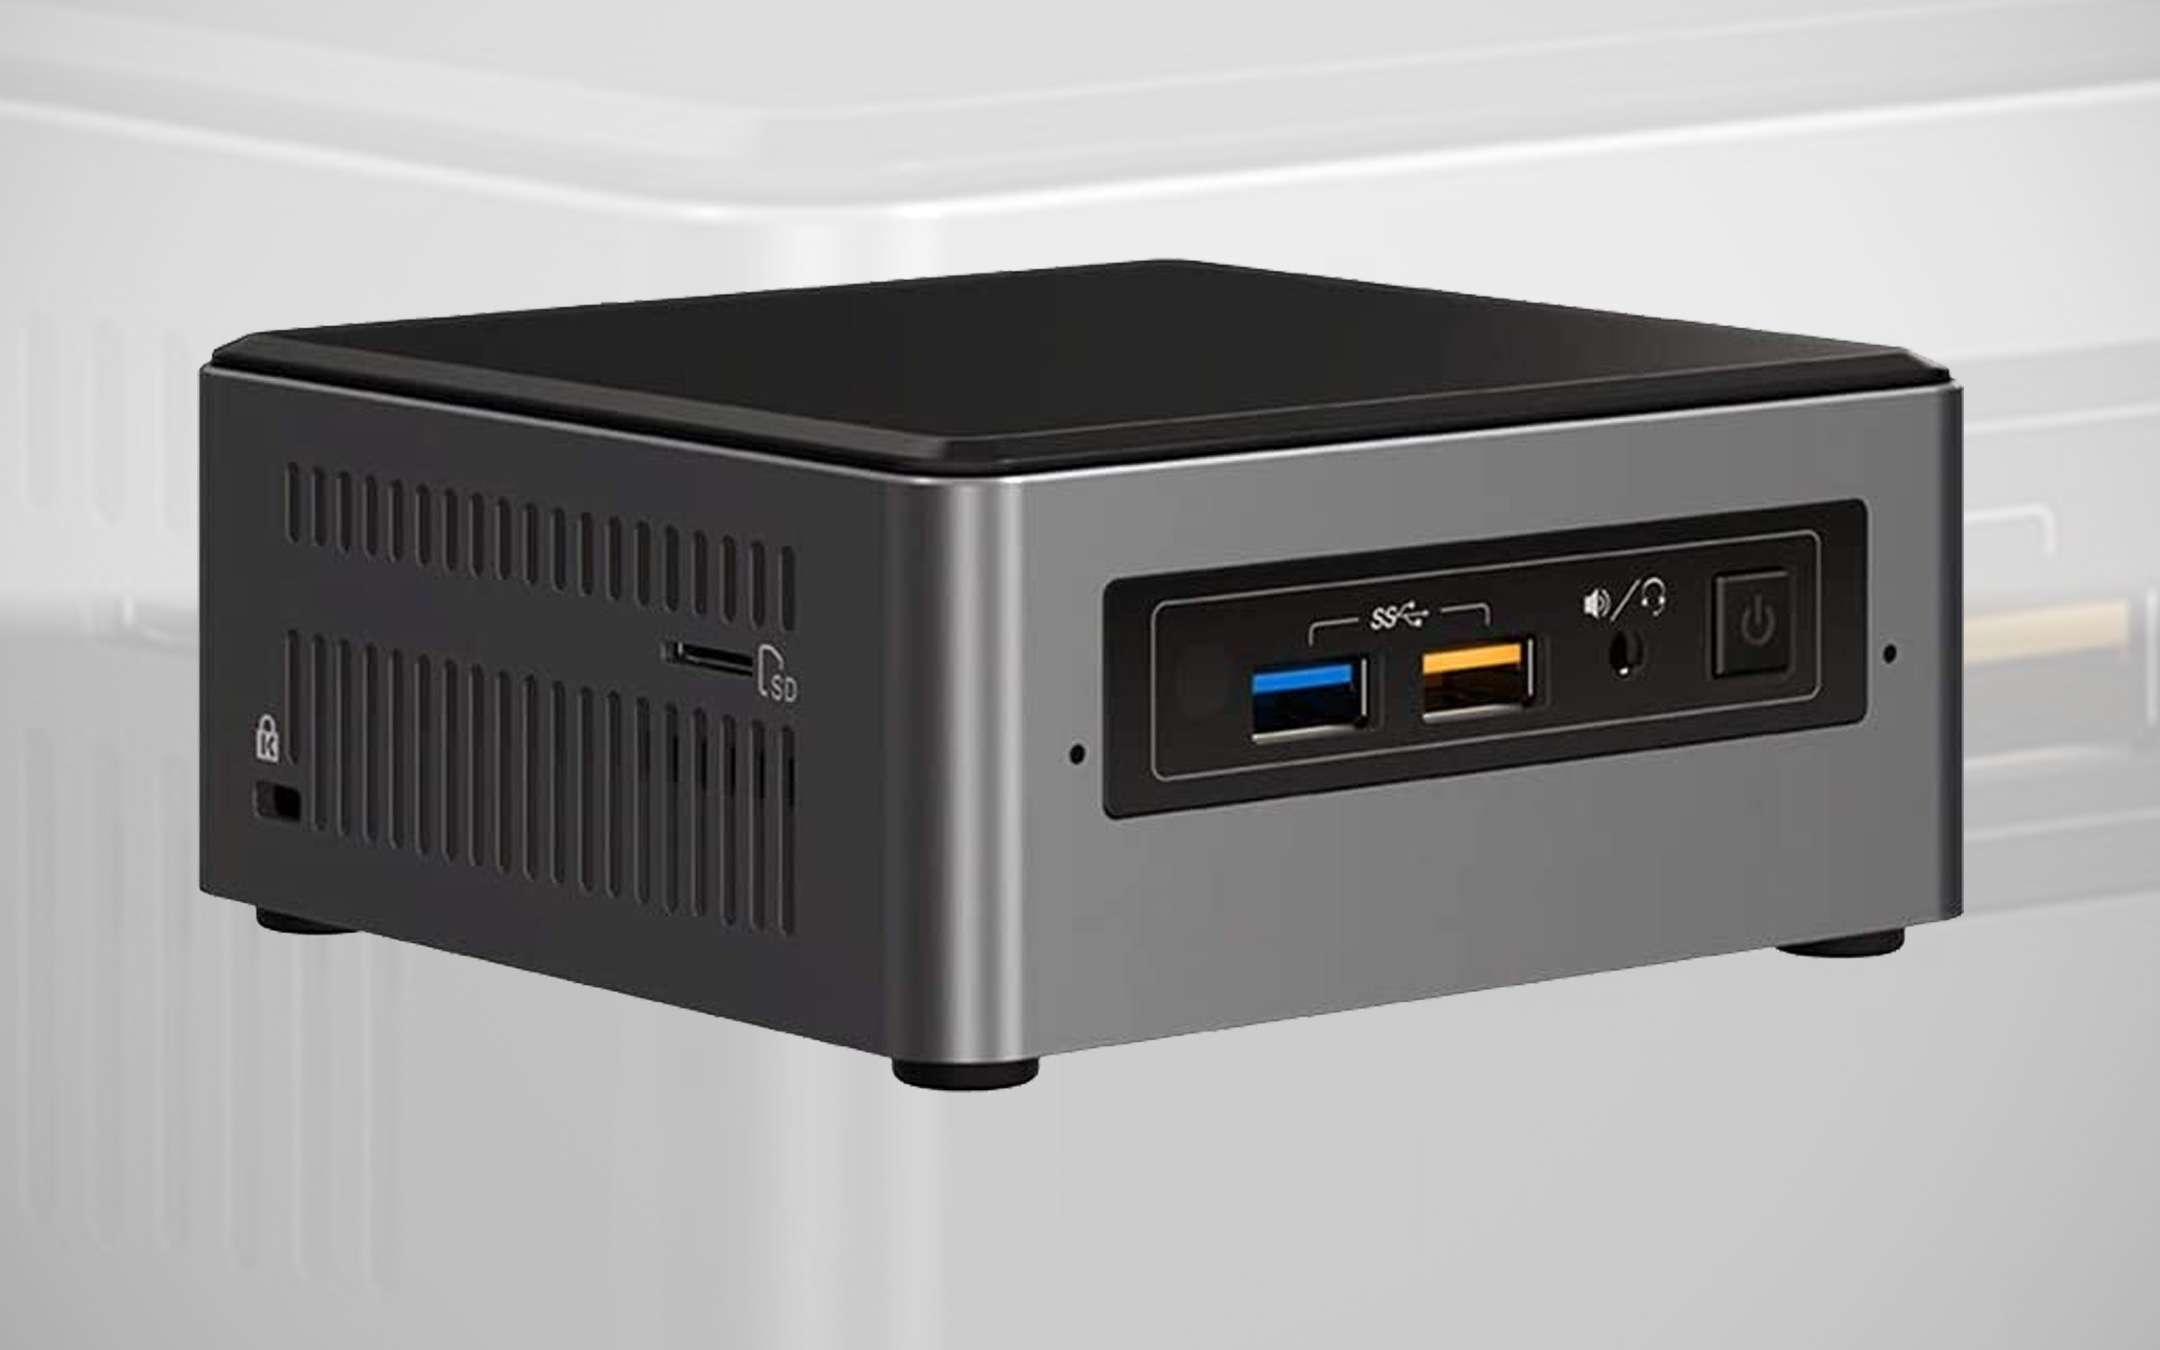 Mini PC: Intel CPU and 1 TB at an attractive price